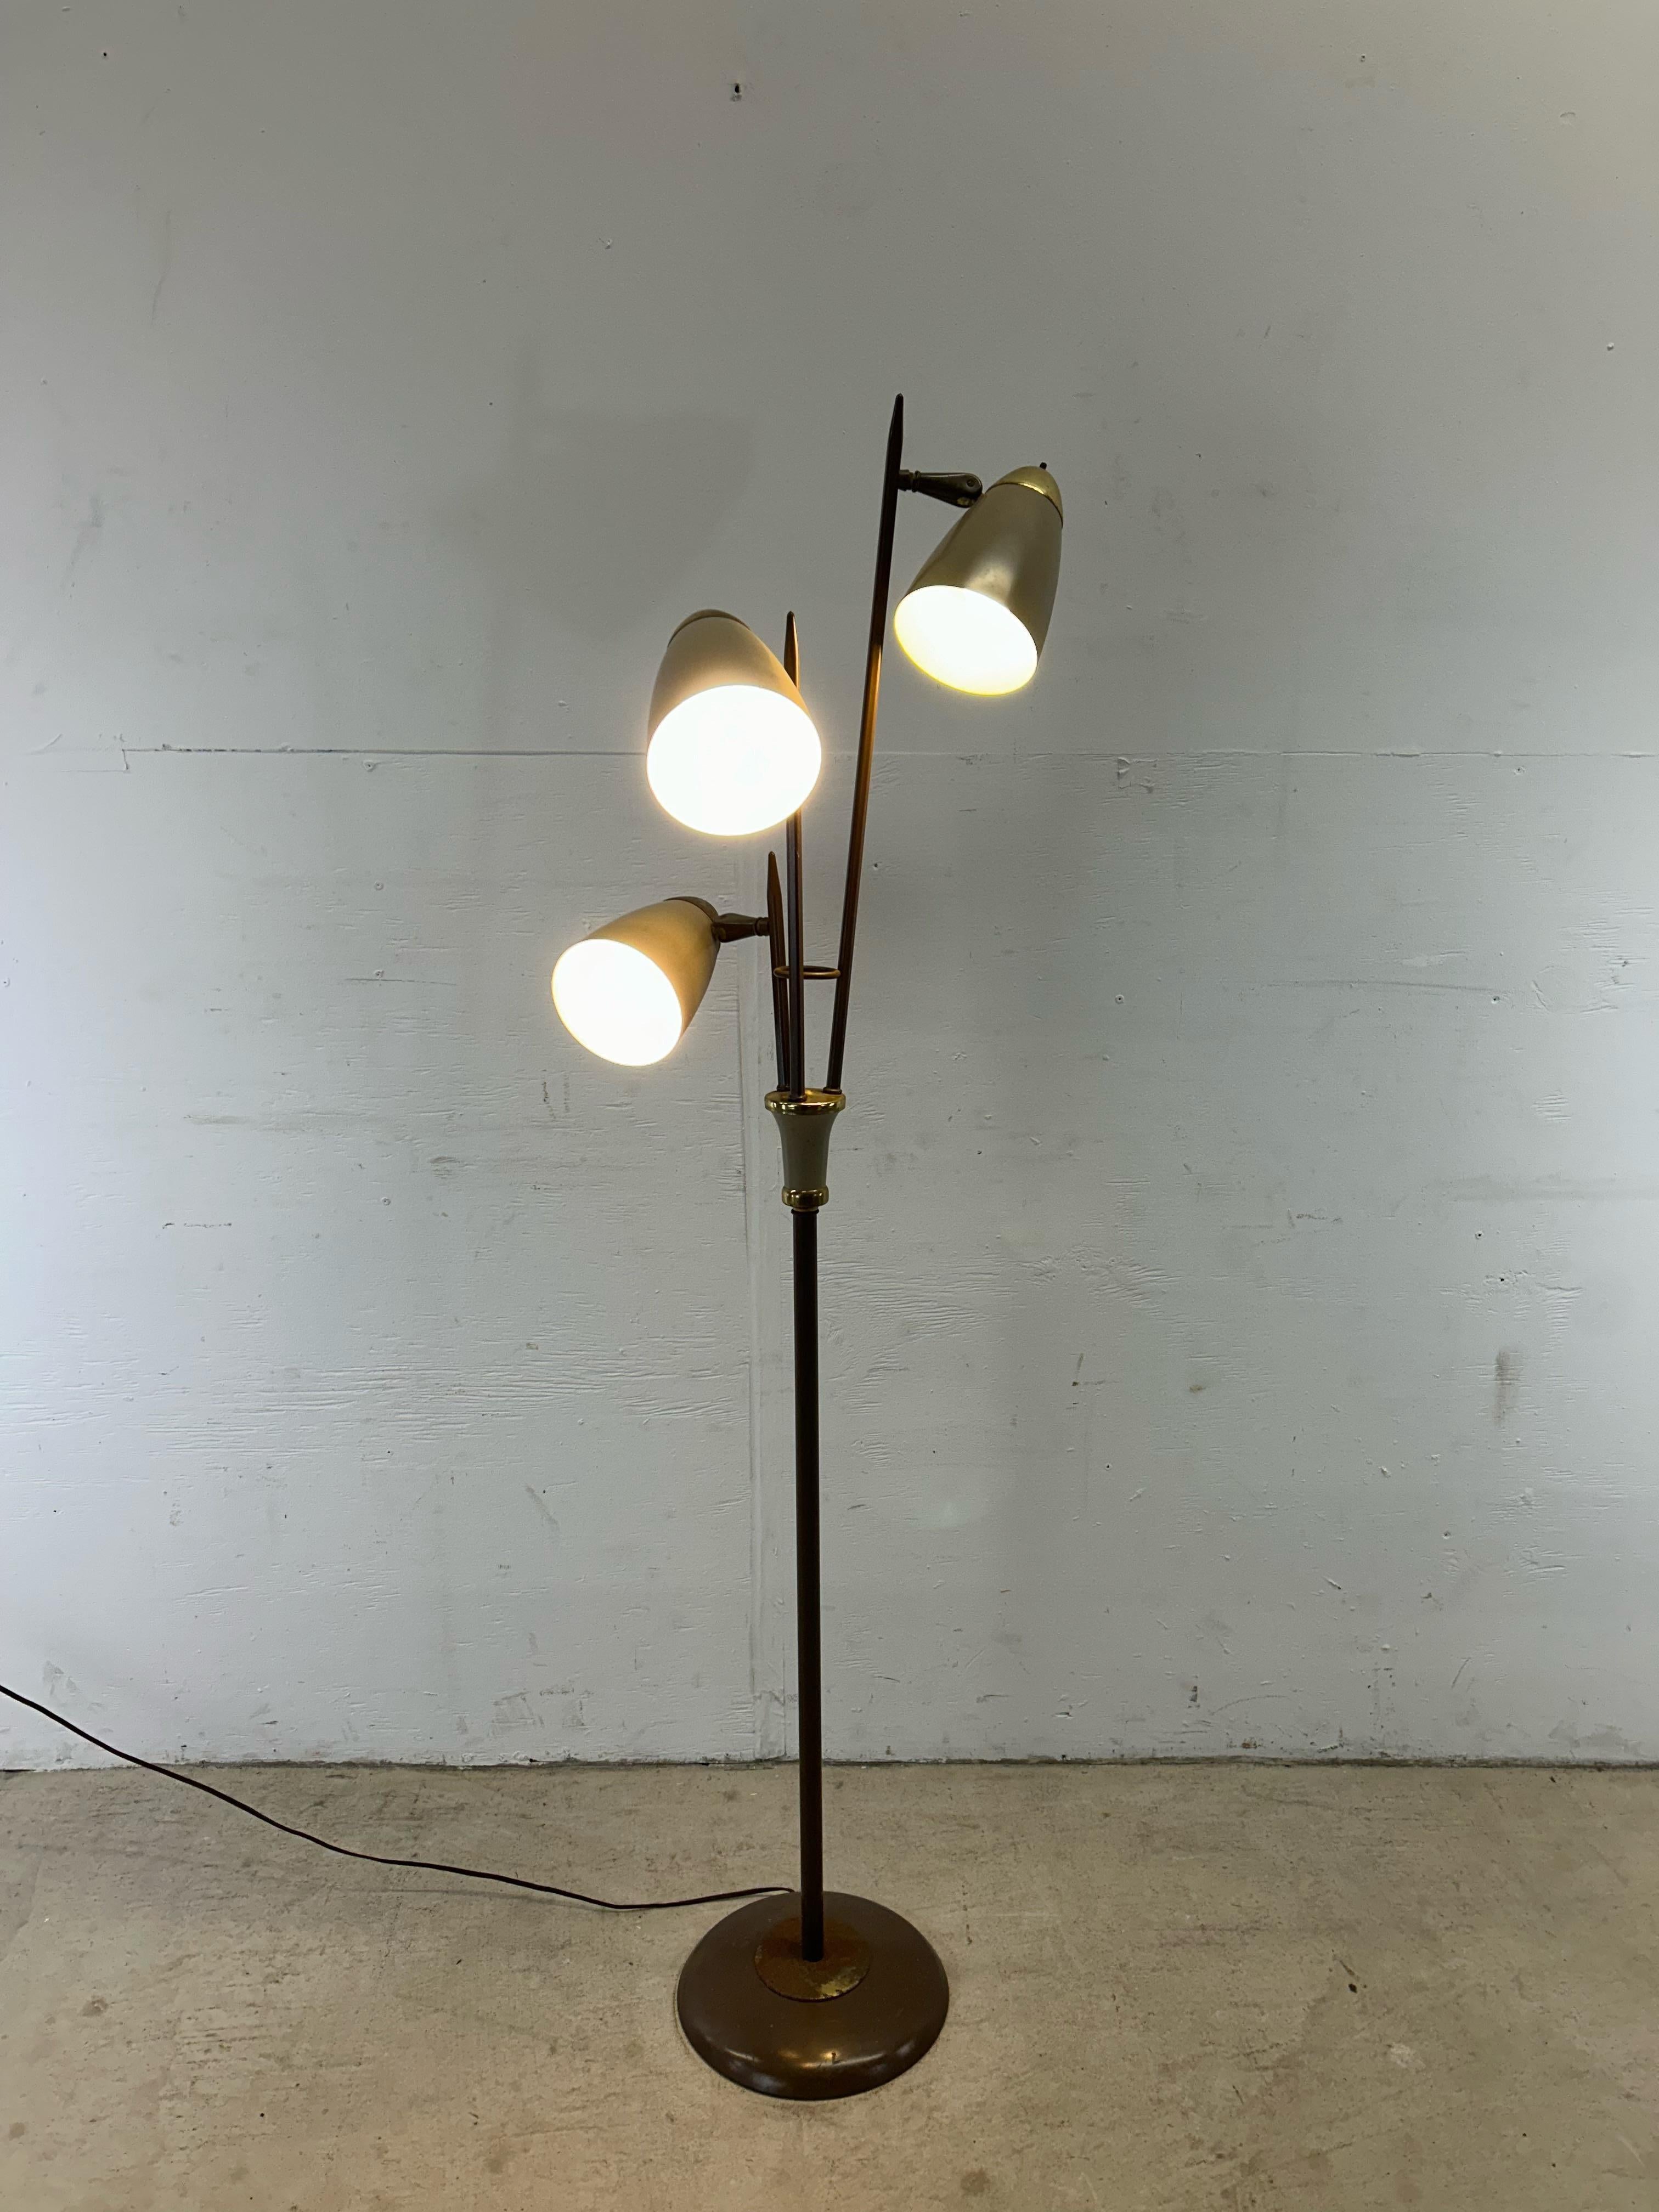 This mid century modern floor lamp features brown painted metal base with three brass accented bullet shades.  Each bulb can be controlled separately with its own switch.

Base measures: 11w 11d 

Dimensions: 21w 21d 61h

Condition: Metal base and